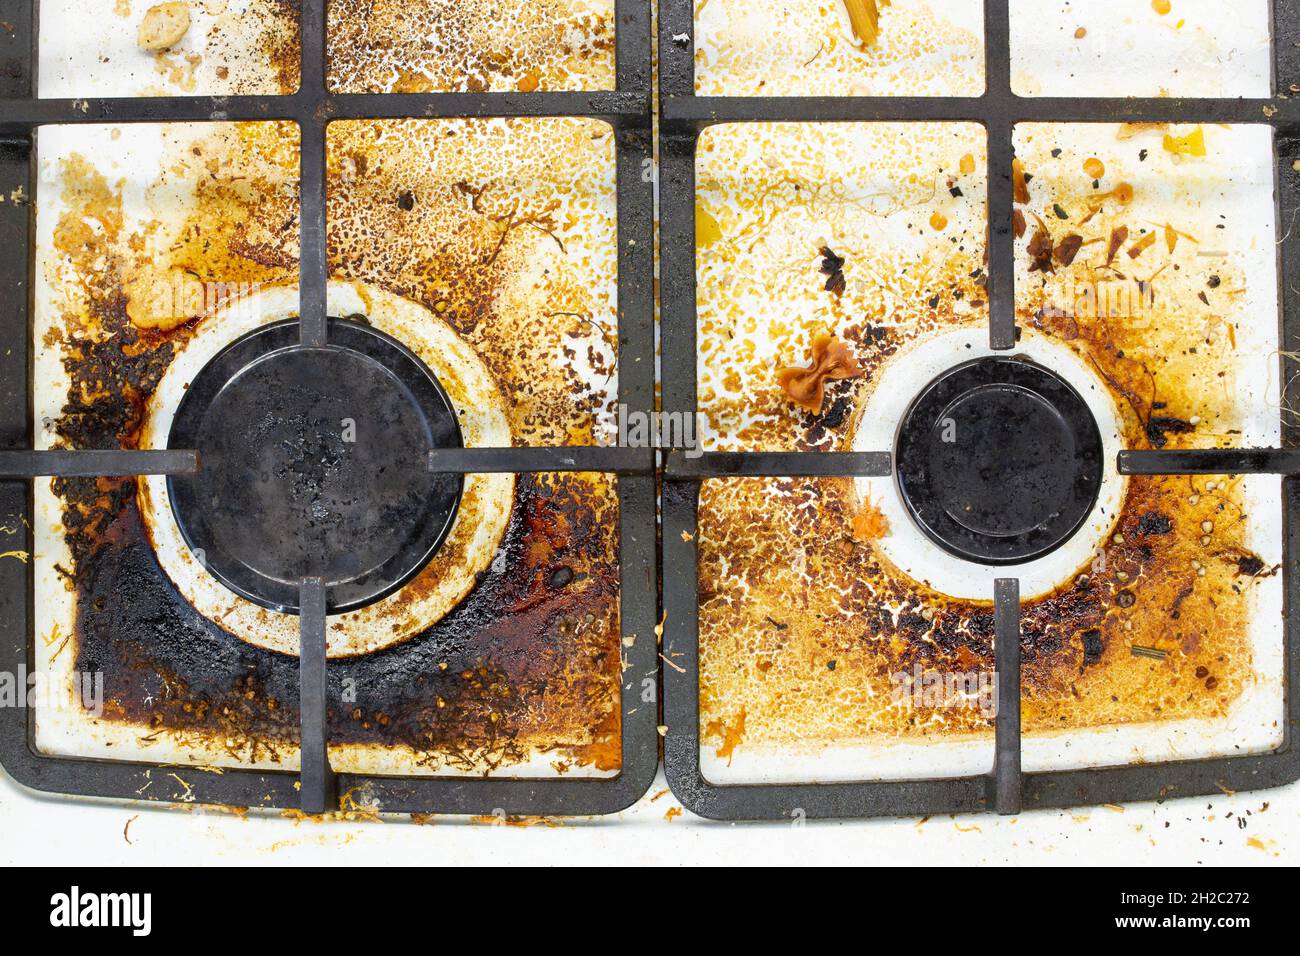 Dirty gas stove surface. Two gas burners and cast iron grate of a gas oven surrounded by old leftovers of food and drinks. Top area surface and burner Stock Photo